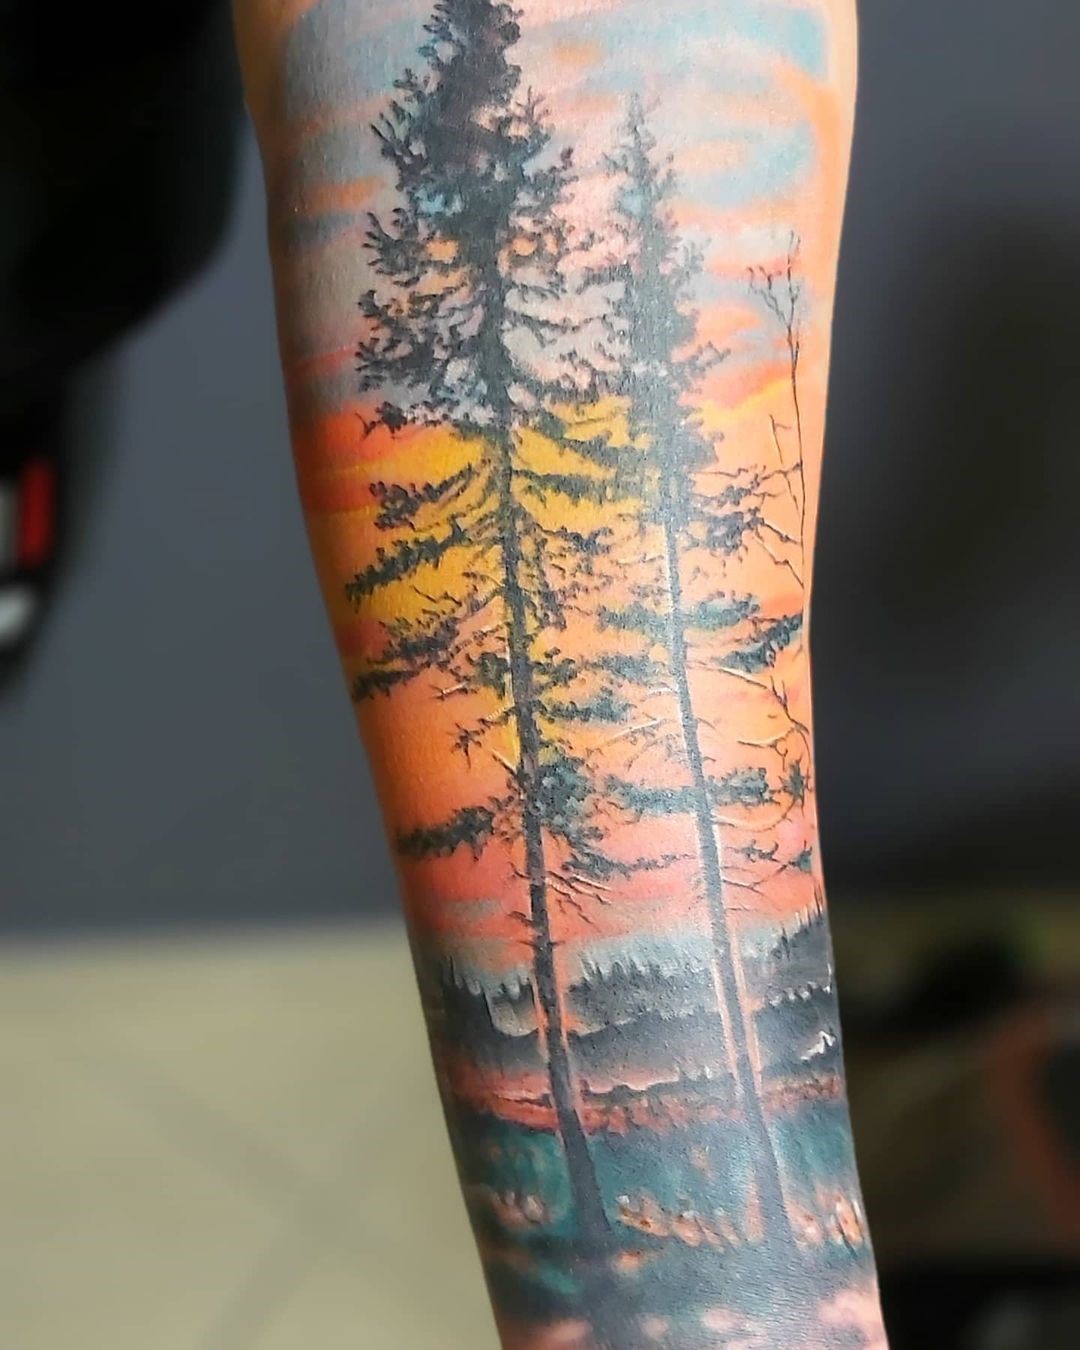 38 Gorgeous Landscape Tattoos Inspired by Nature - TattooBlend